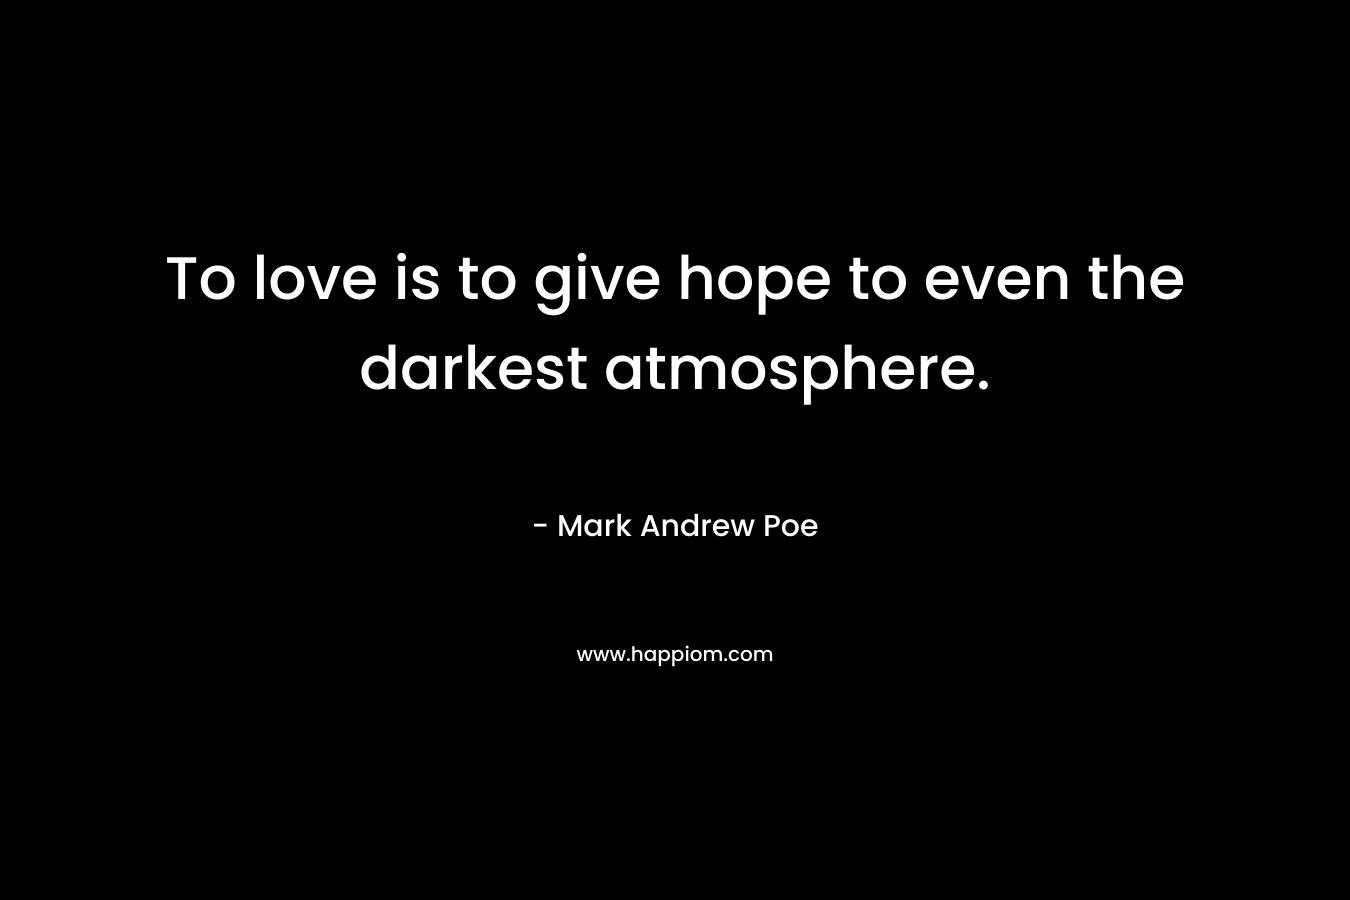 To love is to give hope to even the darkest atmosphere. – Mark Andrew Poe